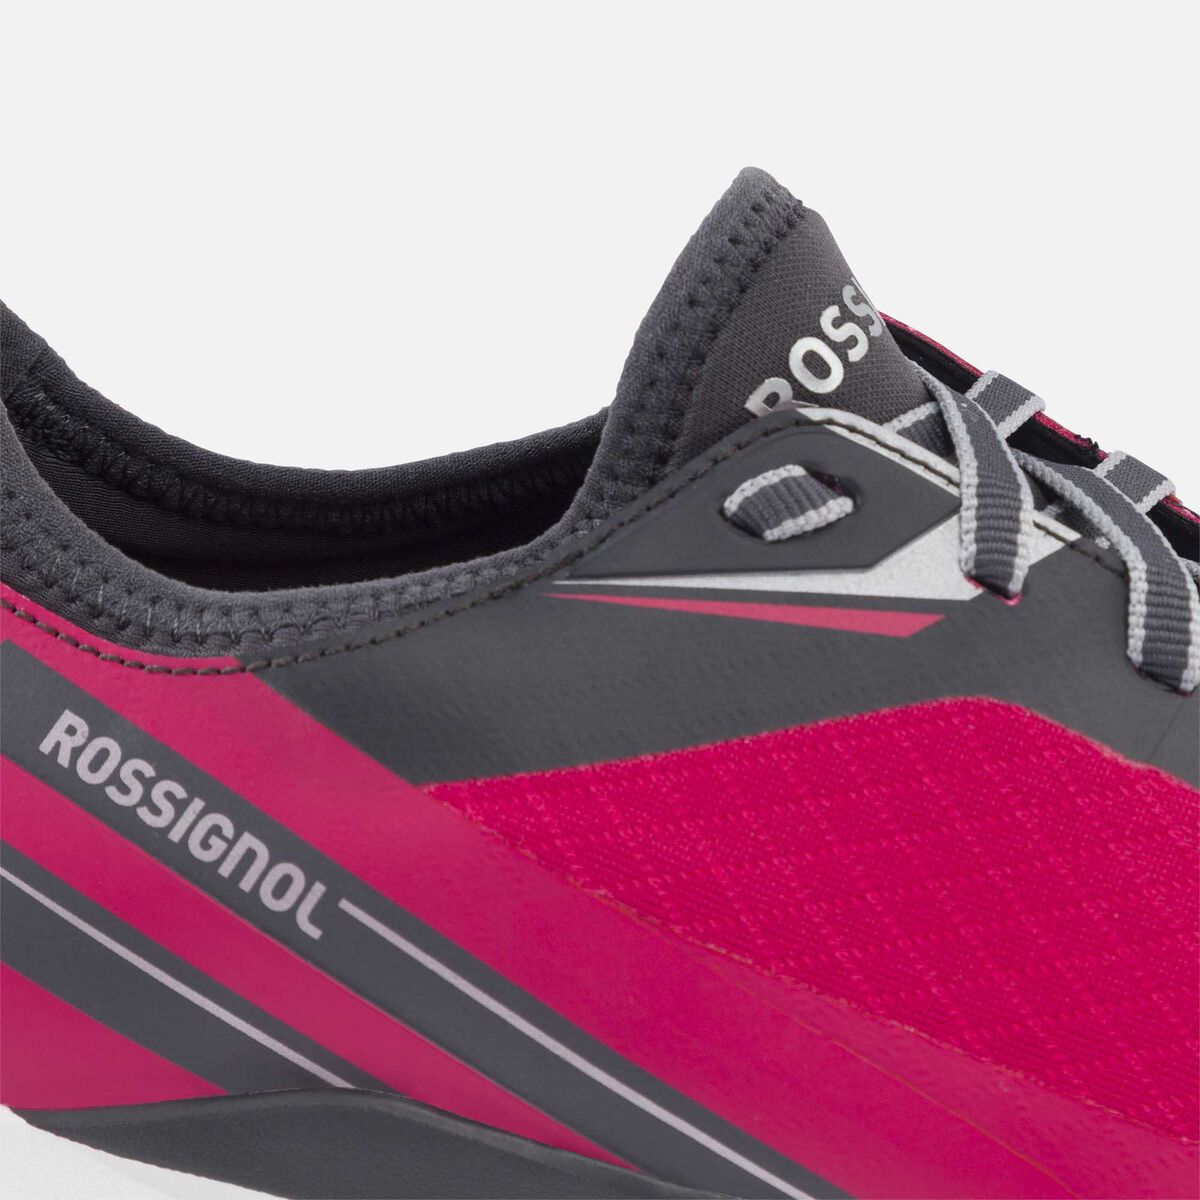 Rossignol Chaussures Active outdoor imperméables roses femme pinkpurple